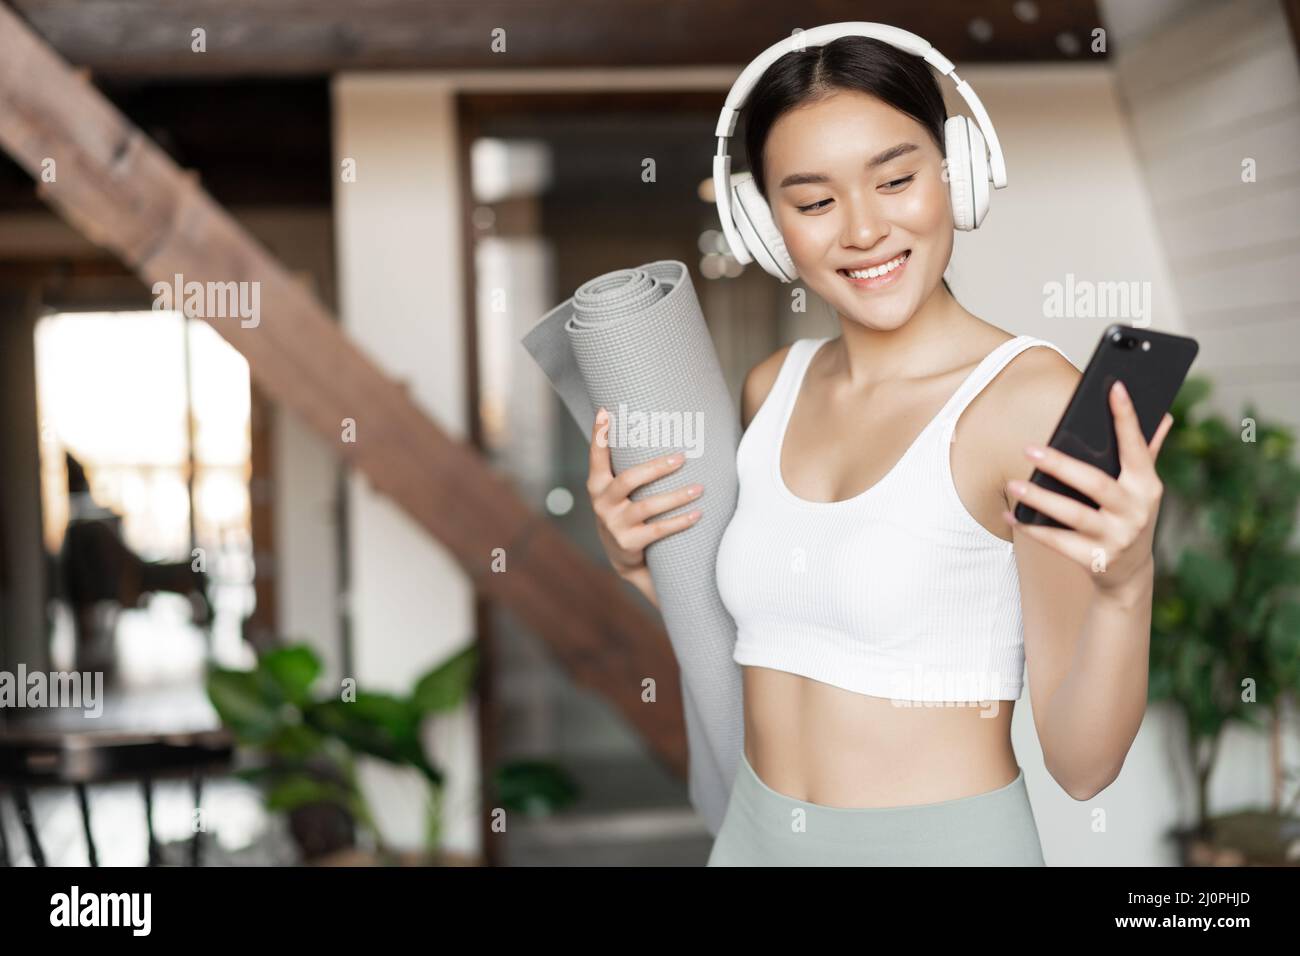 Smiling asian girl with headphones, looking at mobile phone and holding rubber mat for workout, fitness at home, concept of life Stock Photo